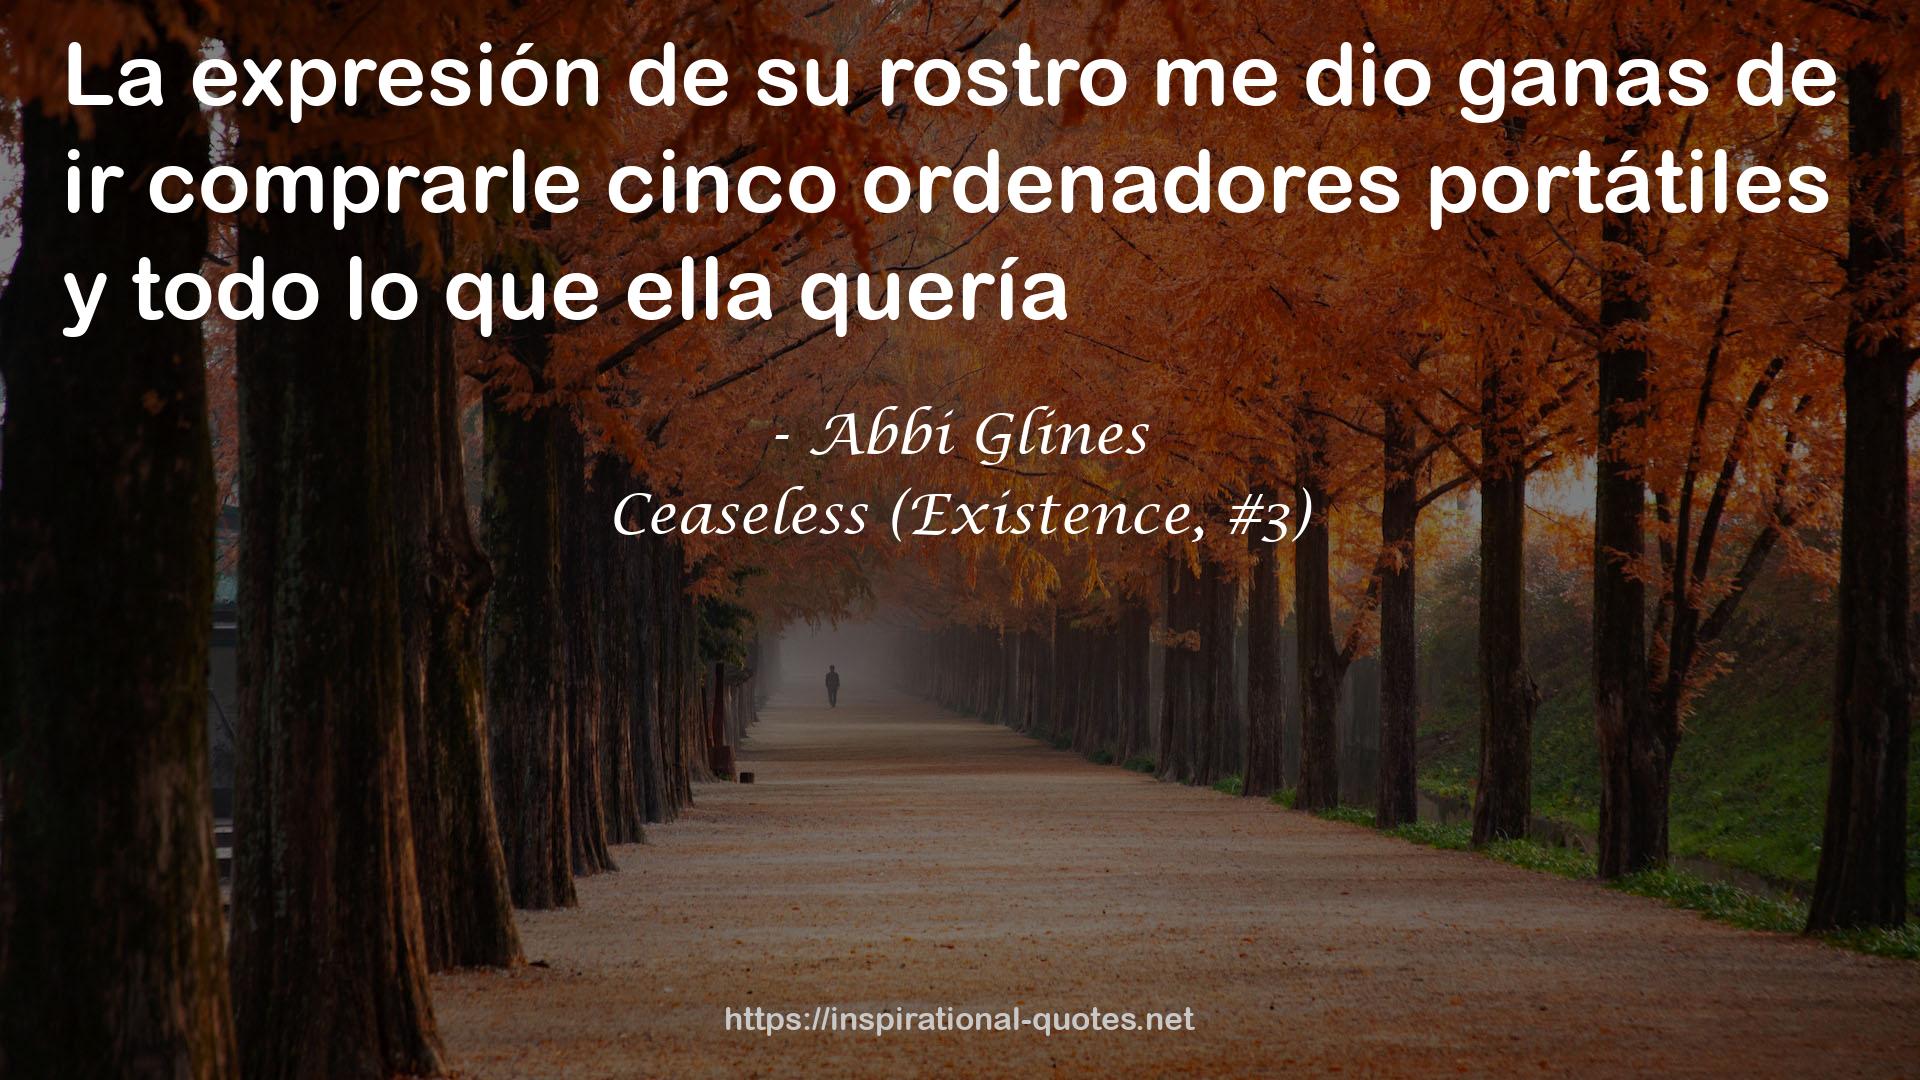 Ceaseless (Existence, #3) QUOTES